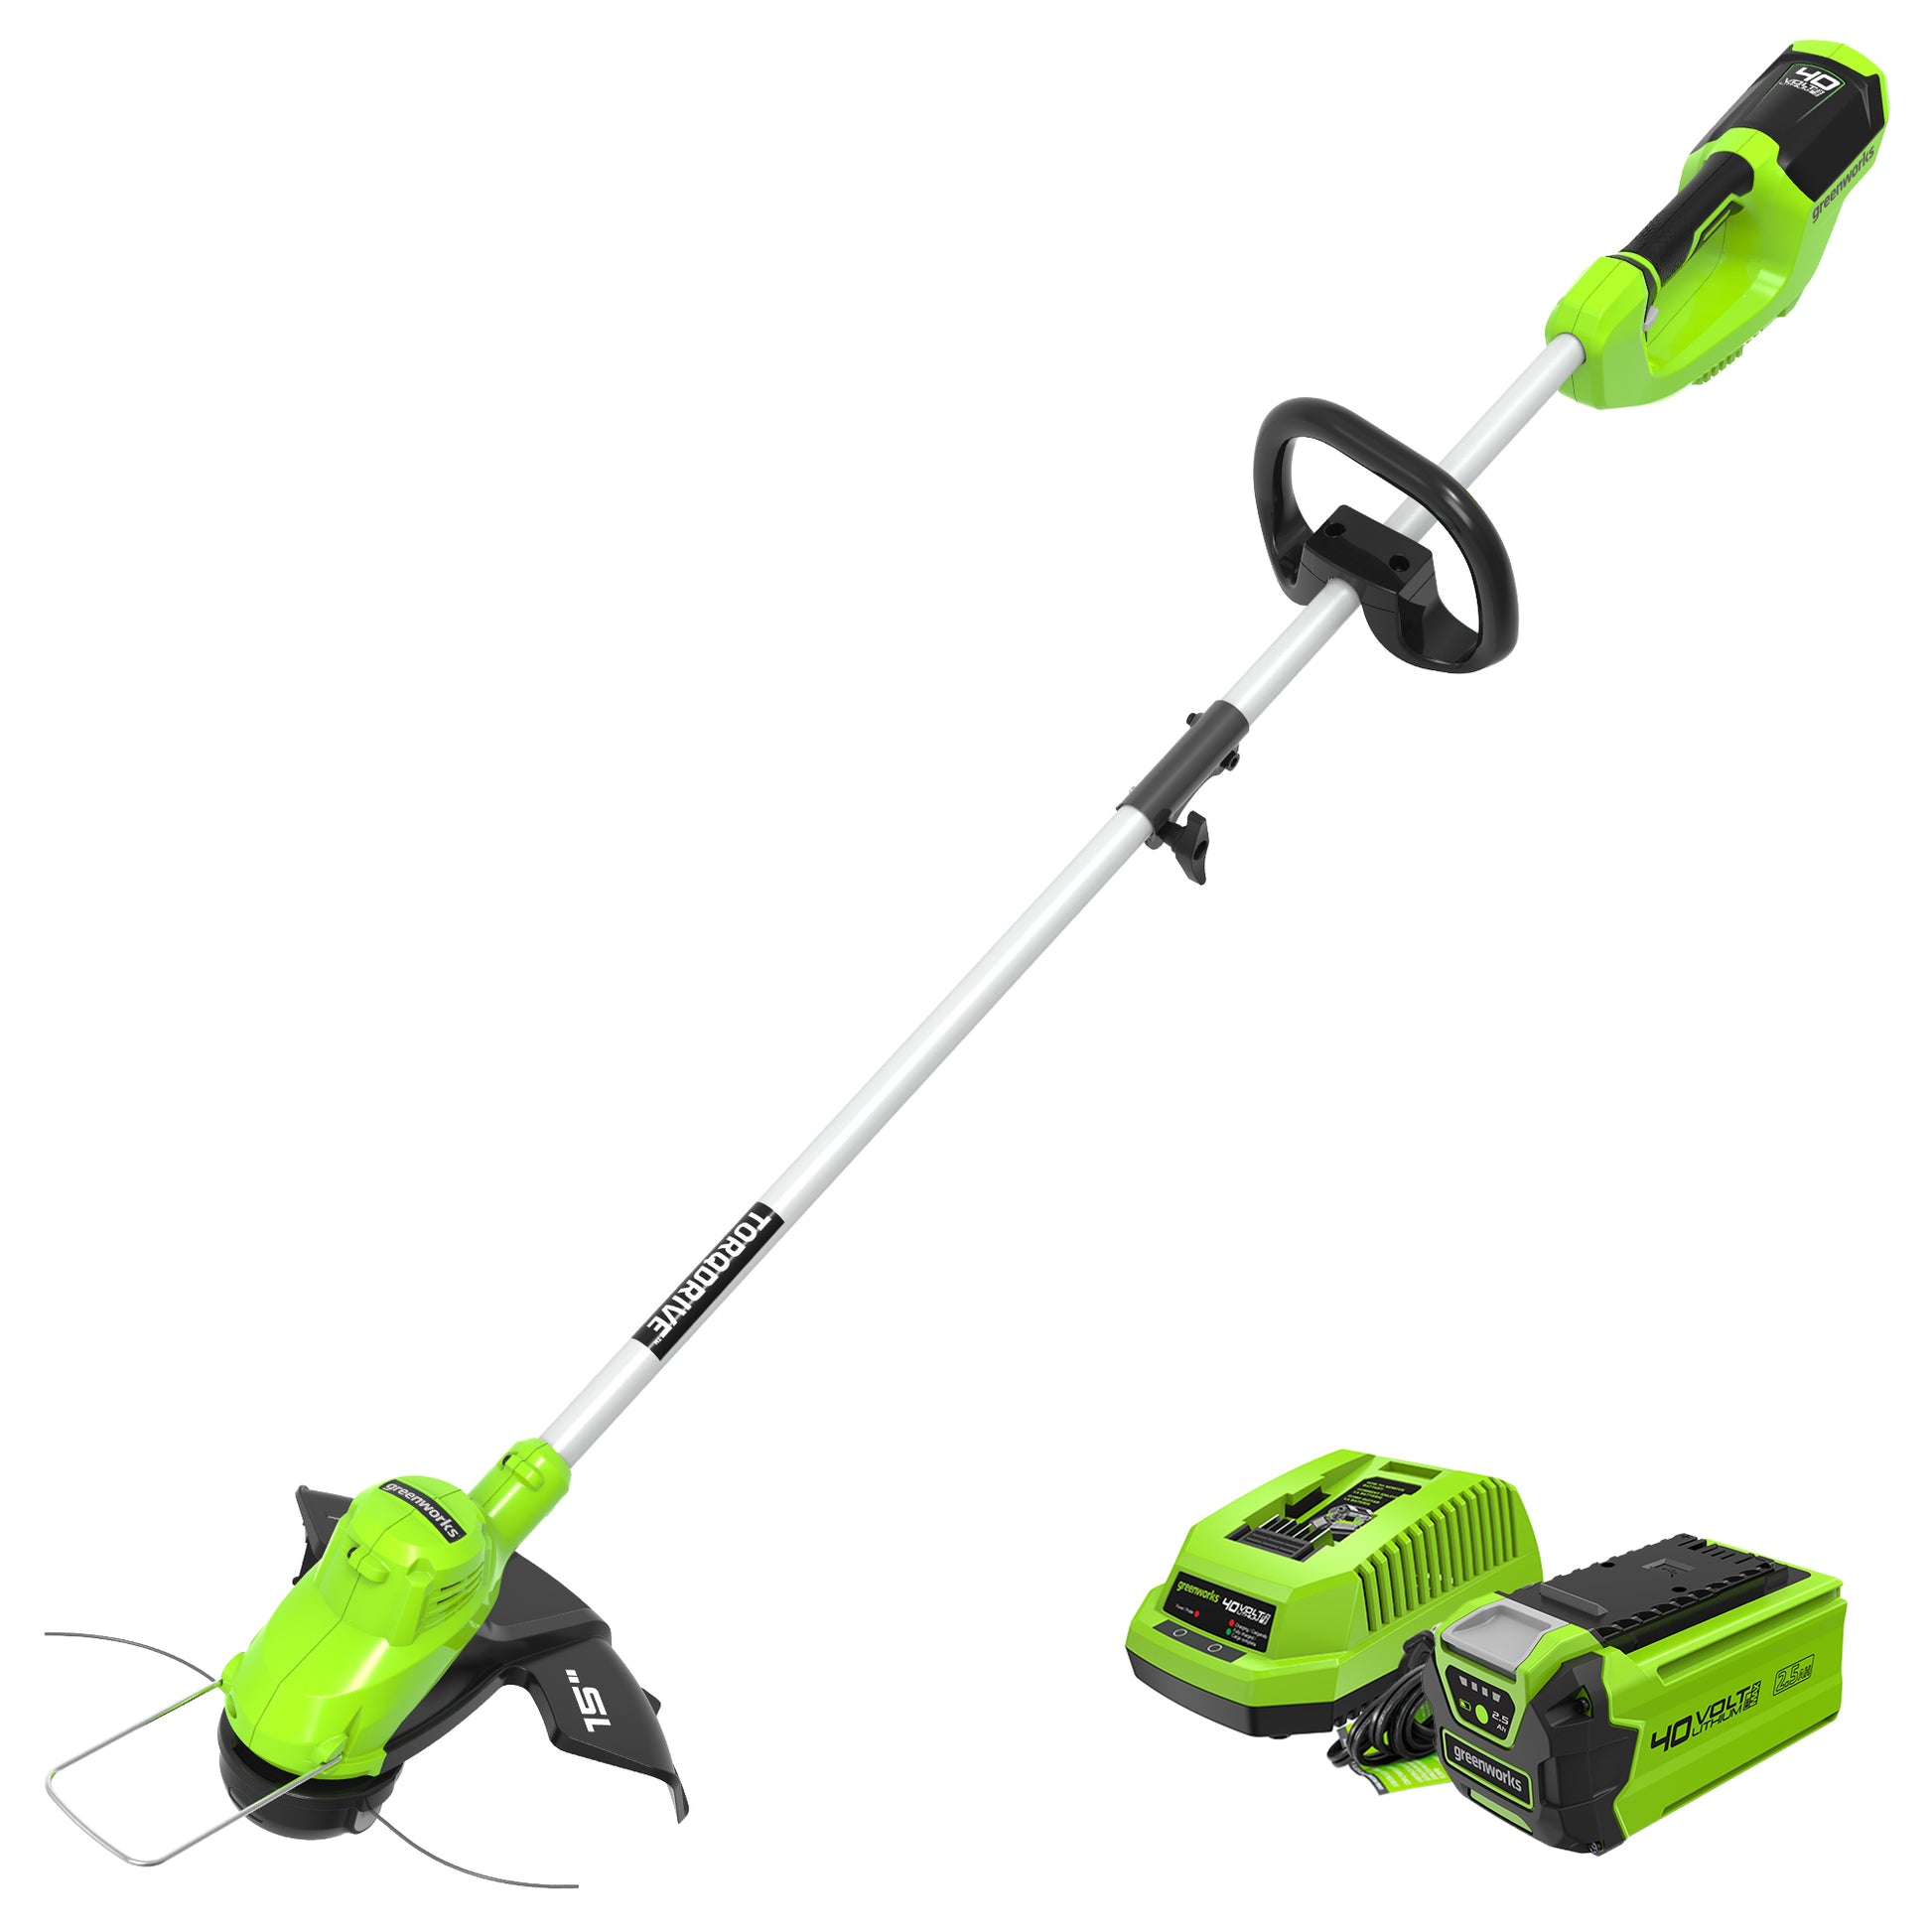 Greenworks 40V 15 Straight Shaft String Trimmer with 2.5 Ah Battery and Charger, 2111802